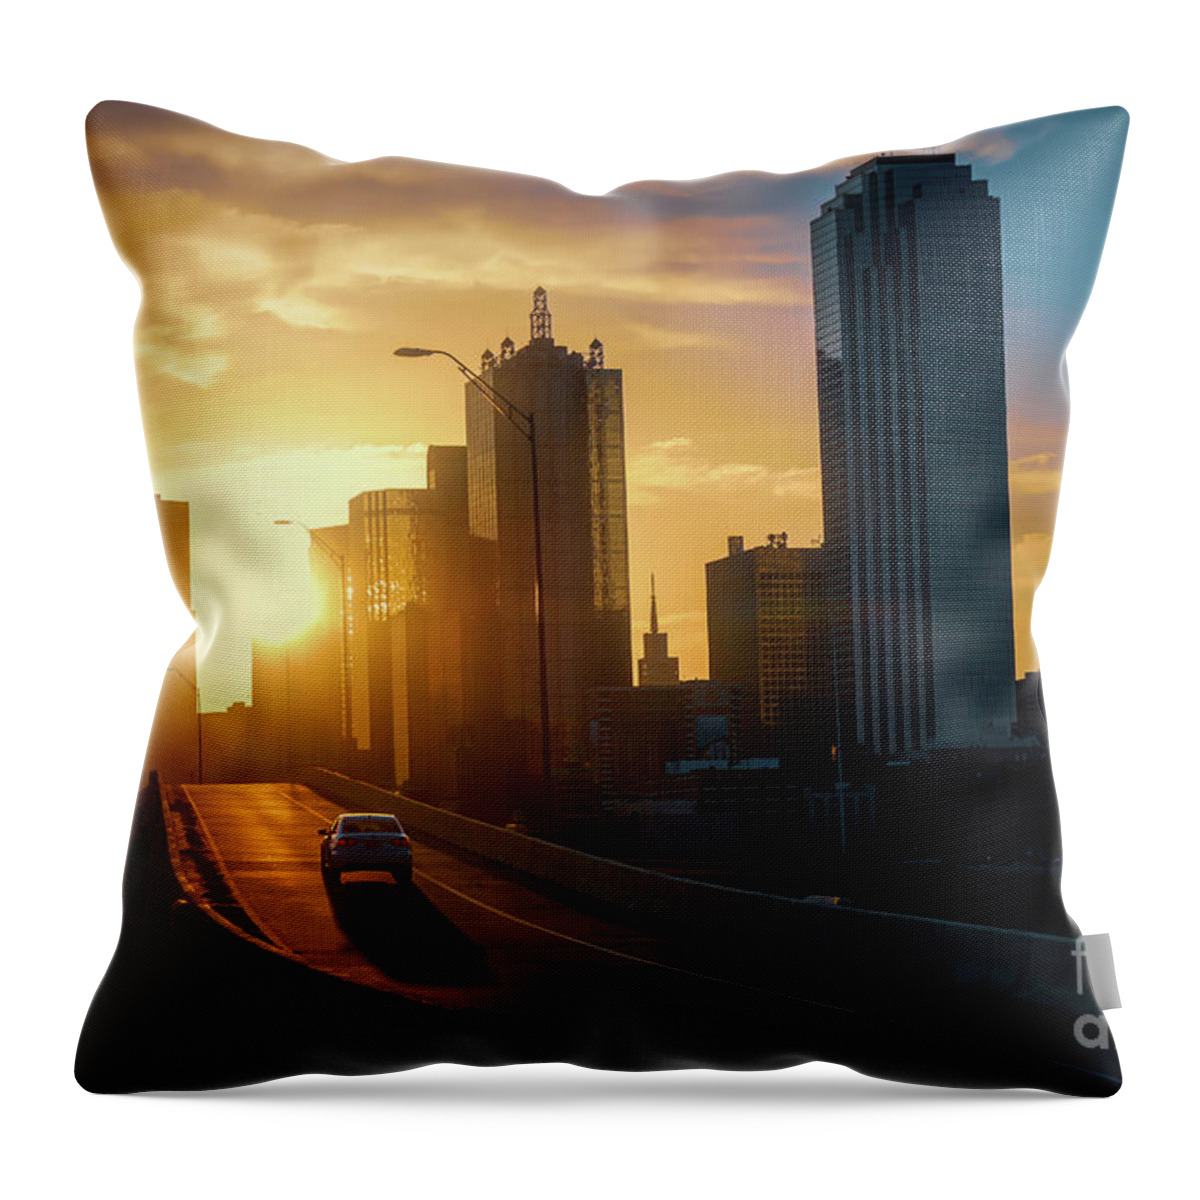 Sunrise Throw Pillow featuring the photograph Sunrise Off the Margaret Hunt Hill Bridge by Diana Mary Sharpton